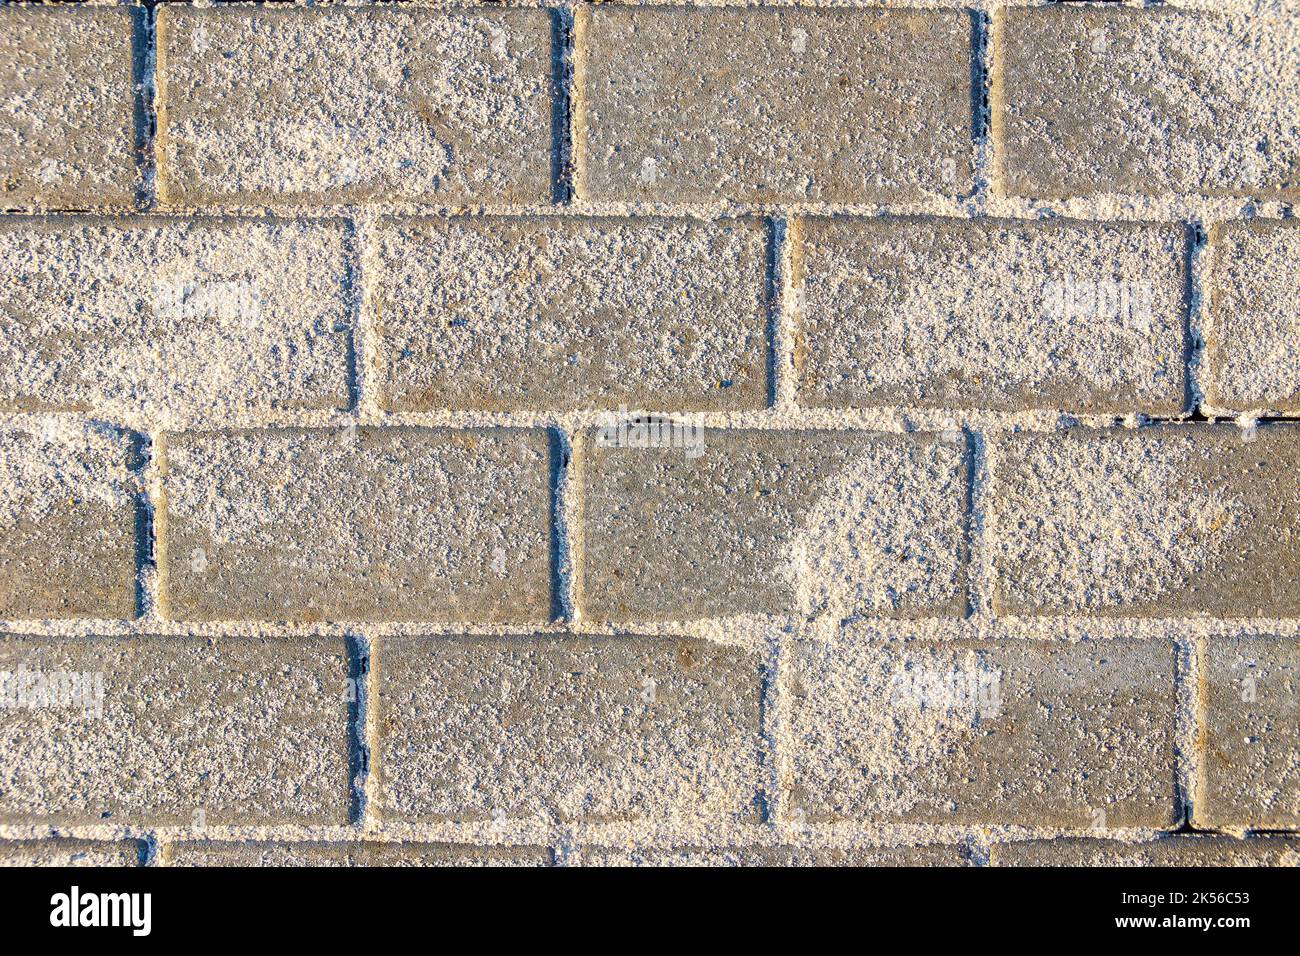 Horizontal texture of paving slabs made of artificial stone or concrete is laid and seams are covered with sand, the remains of which are on the surfa Stock Photo